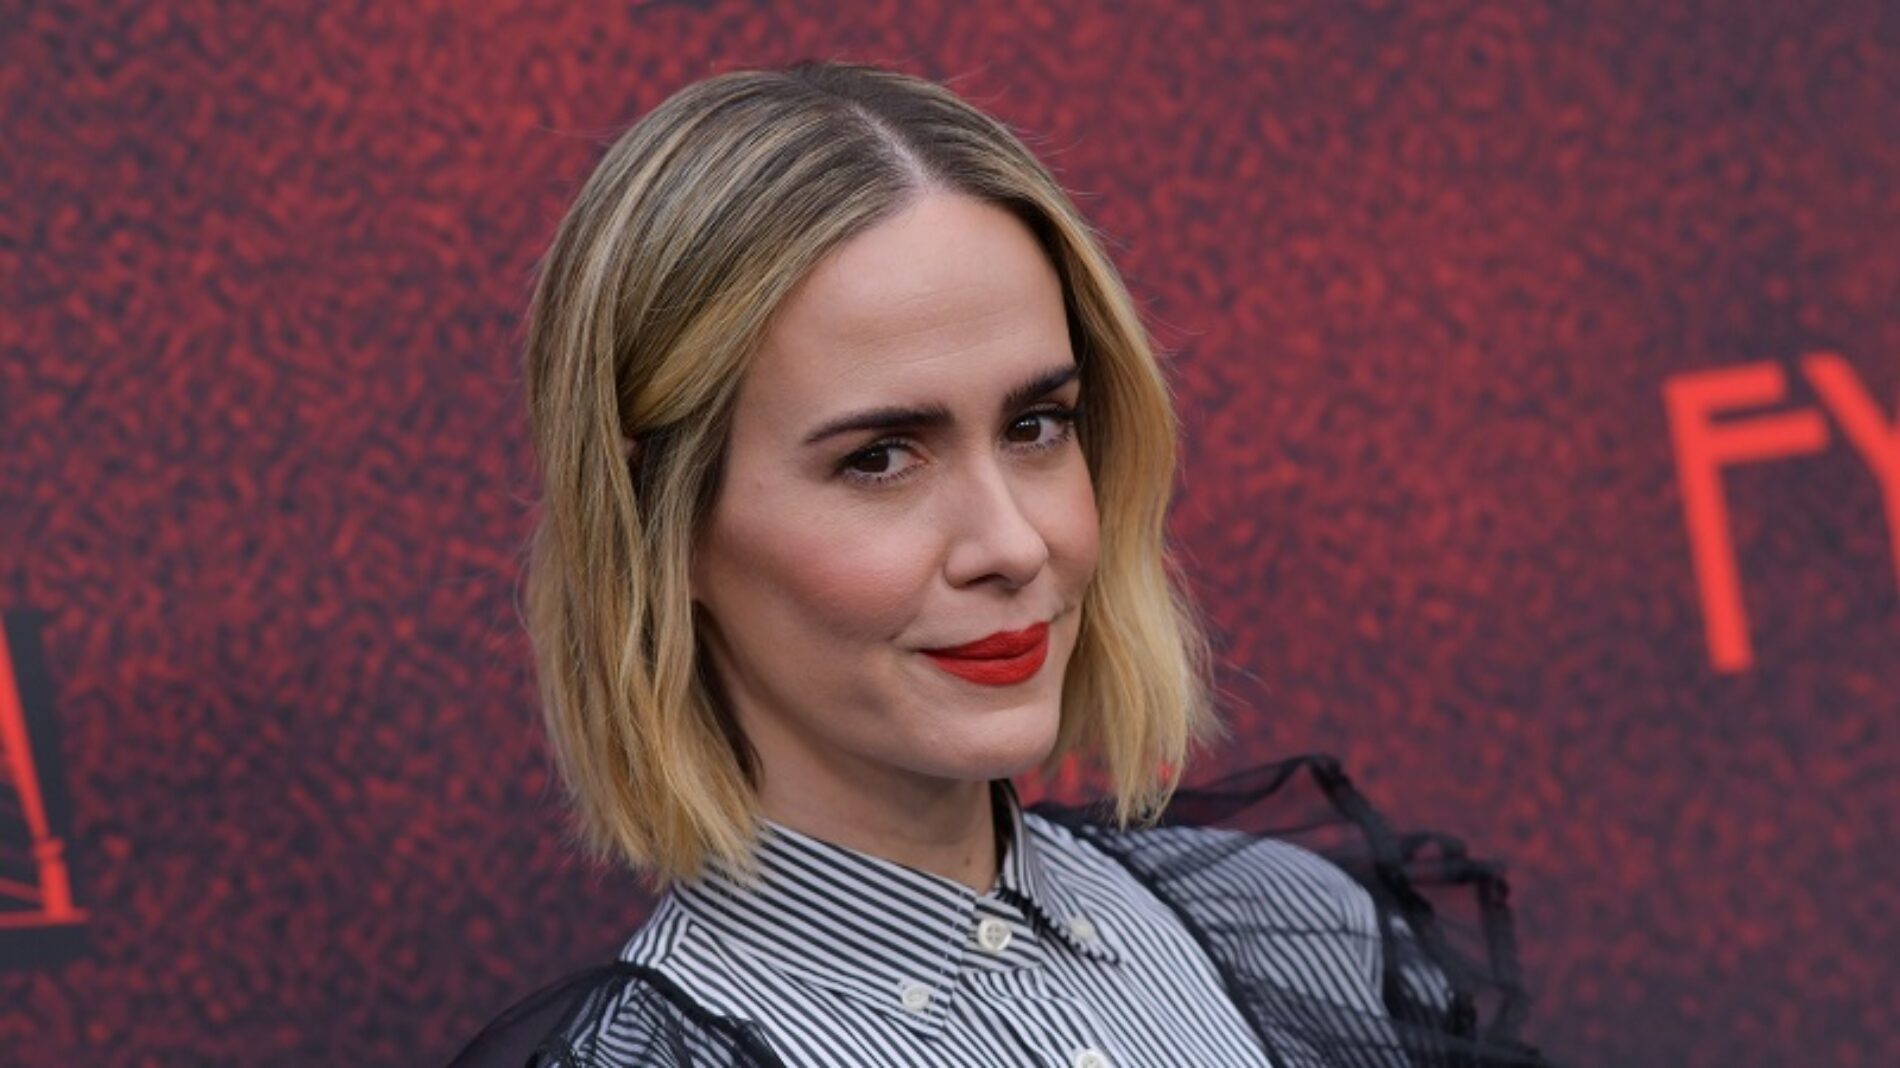 Sarah Paulson faces backlash from Gay Twitter over the Use of Pronouns